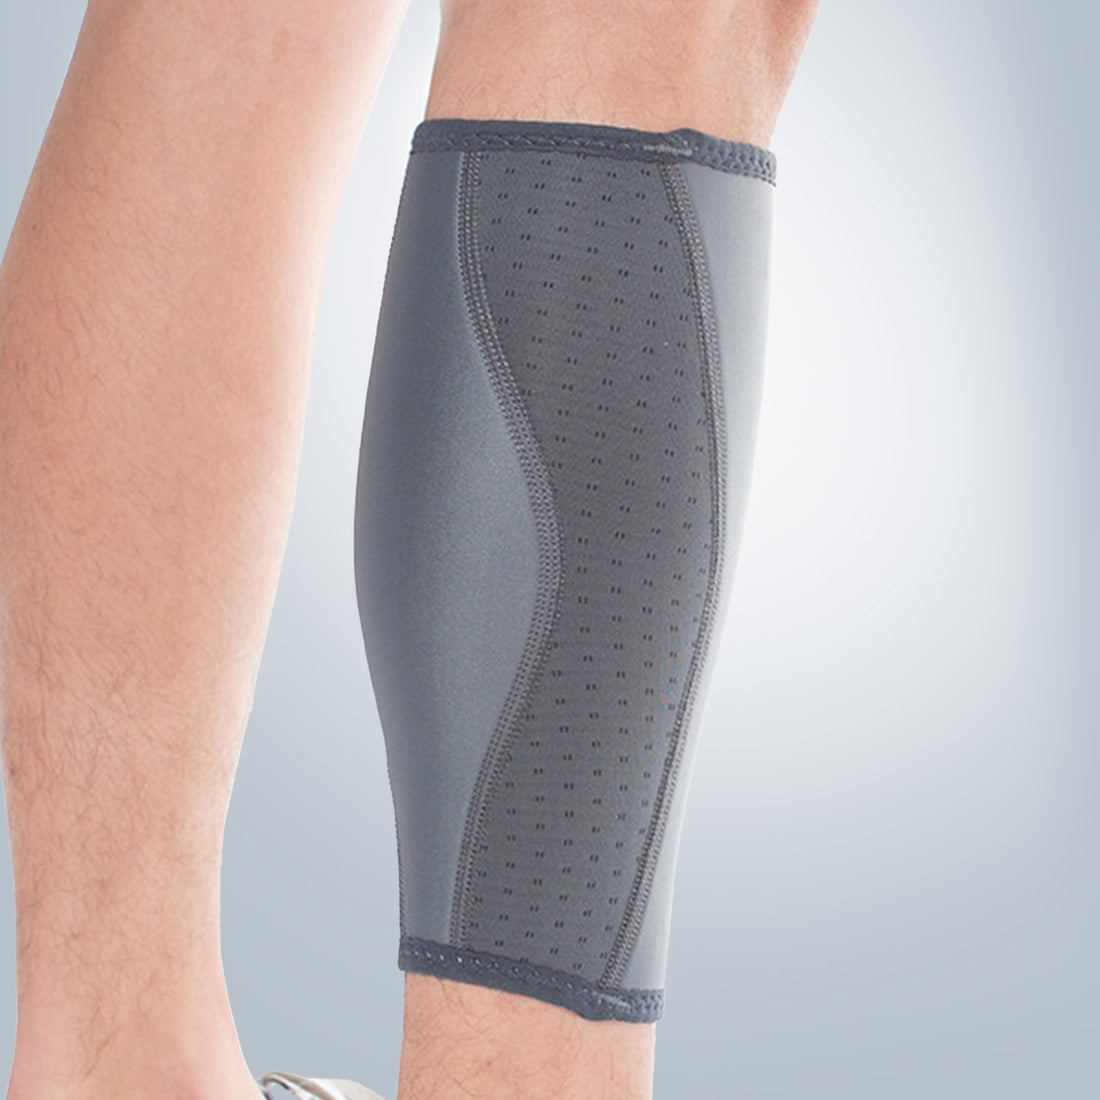 Calf Compression Sleeve Preview #2